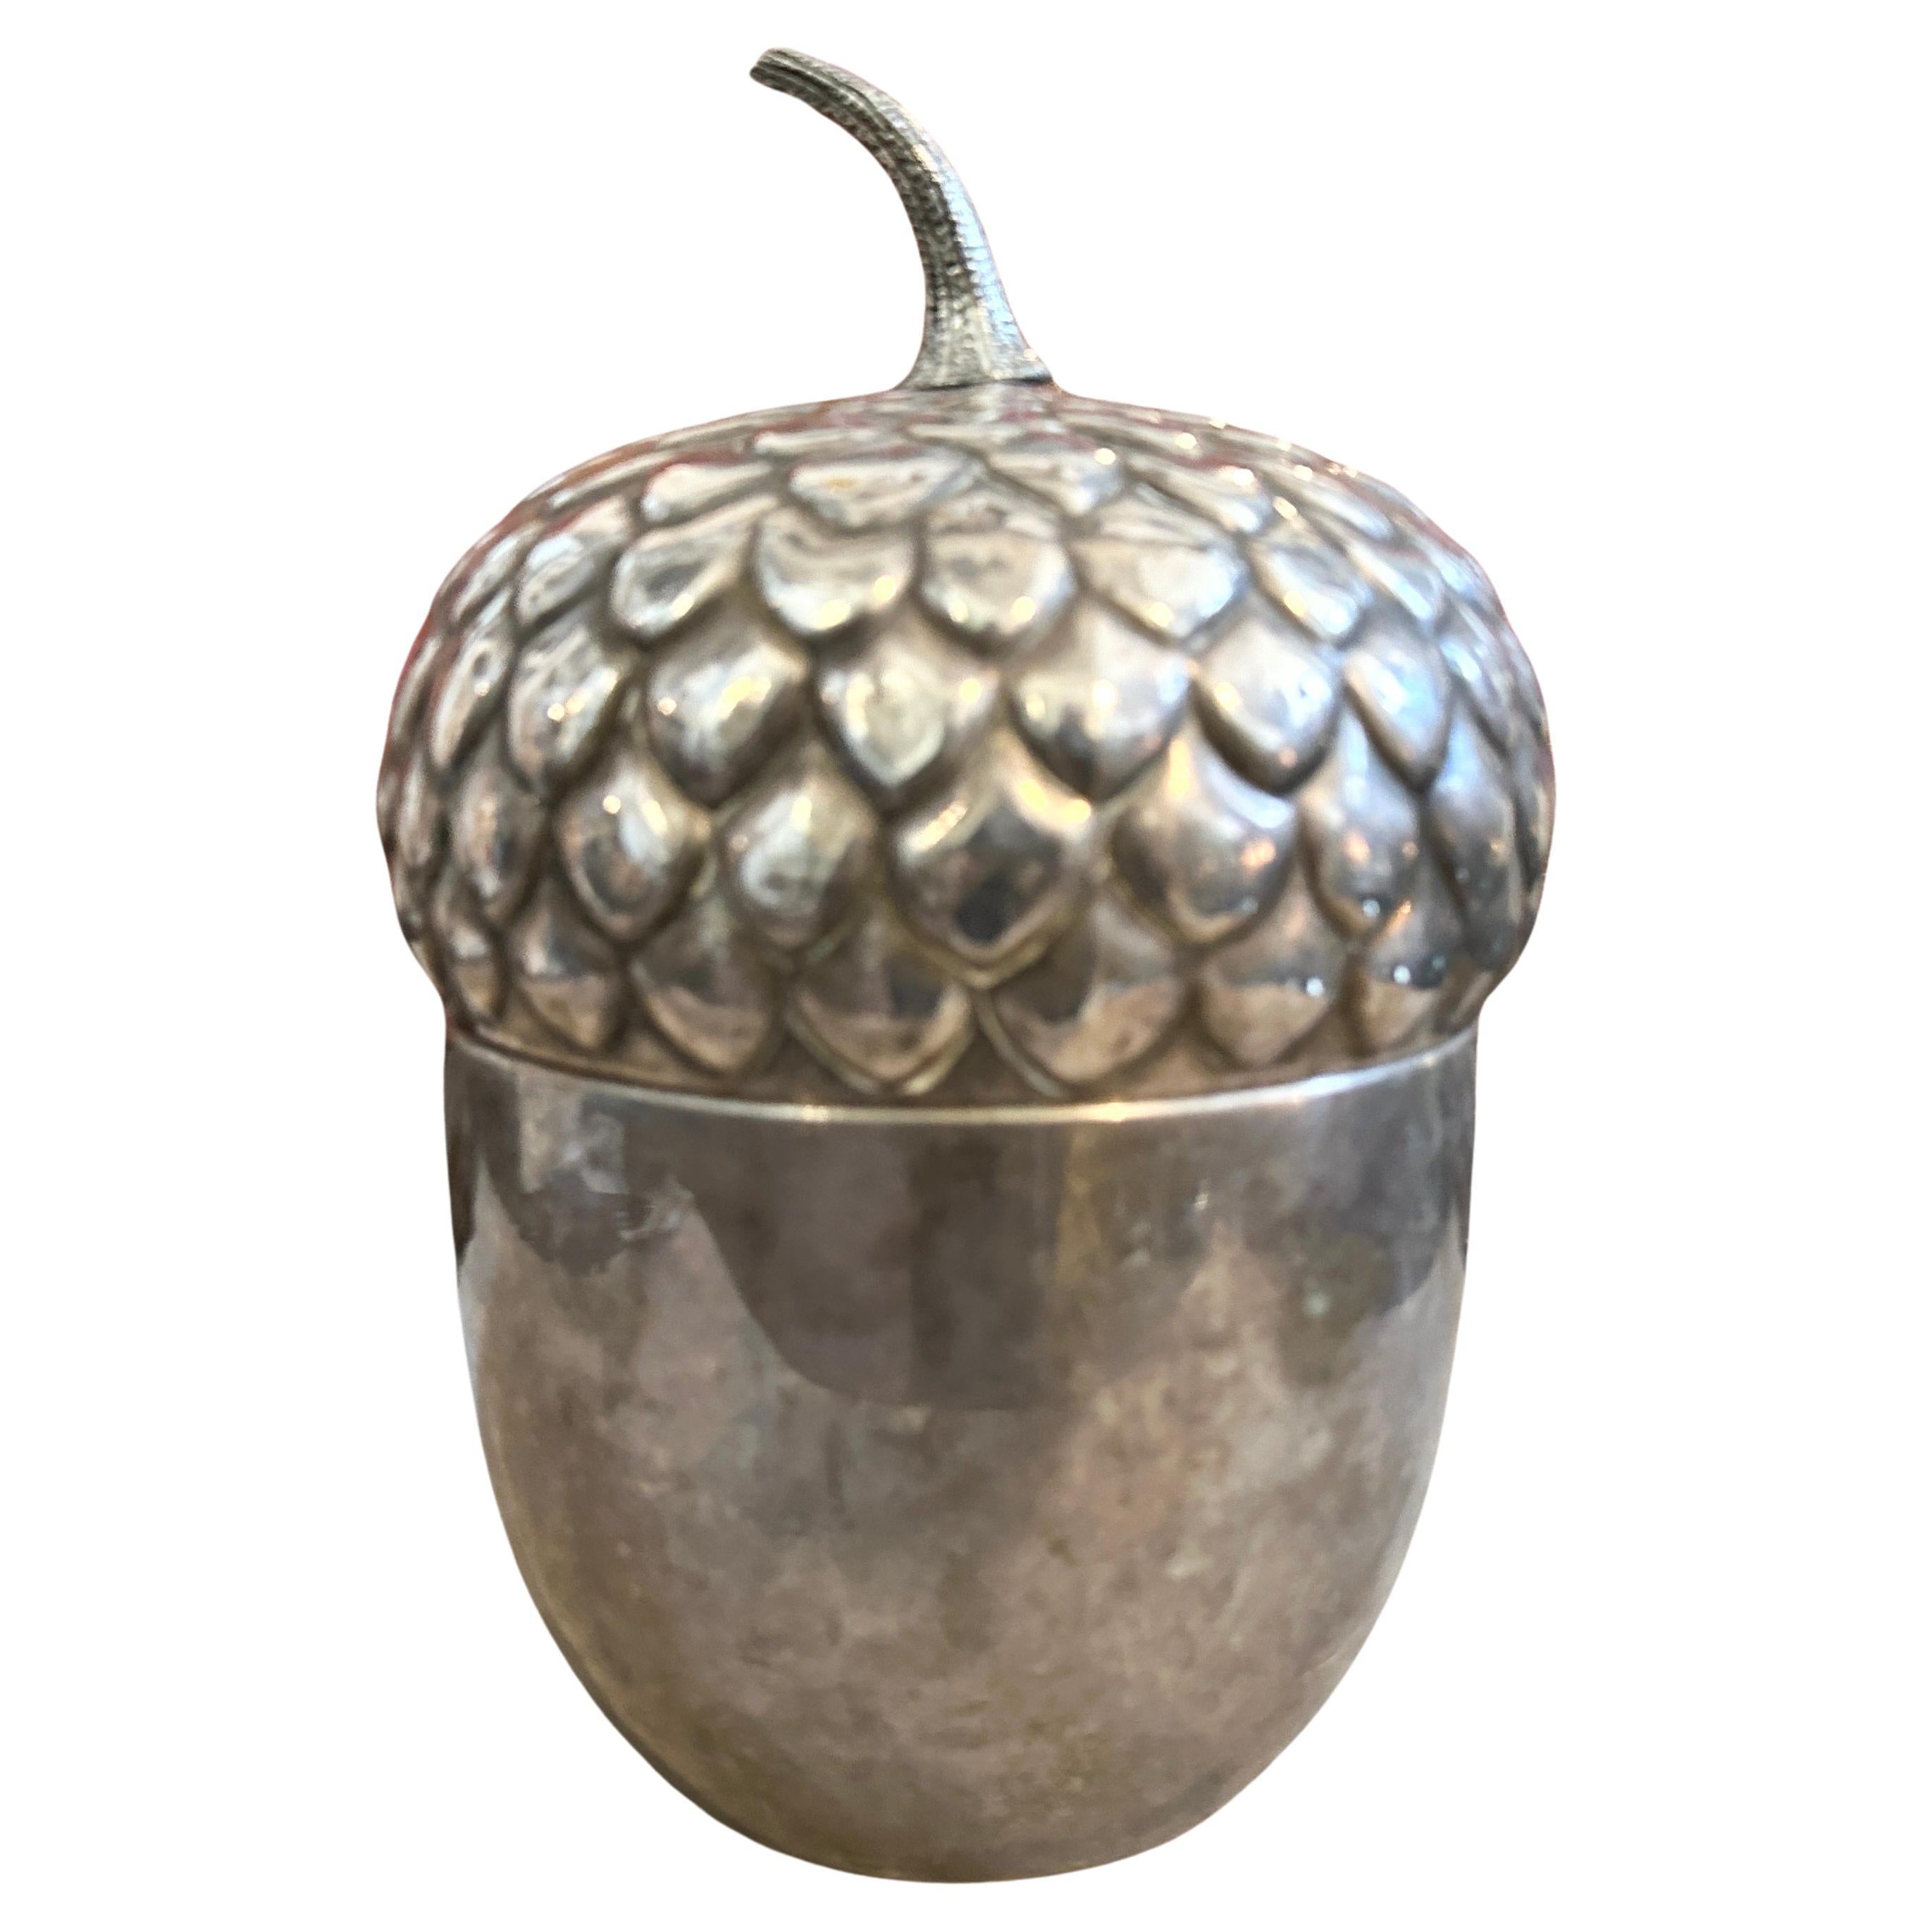 1970s Modernist Silver Plated Acorn Shaped Ice Bucket by Teghini Firenze For Sale